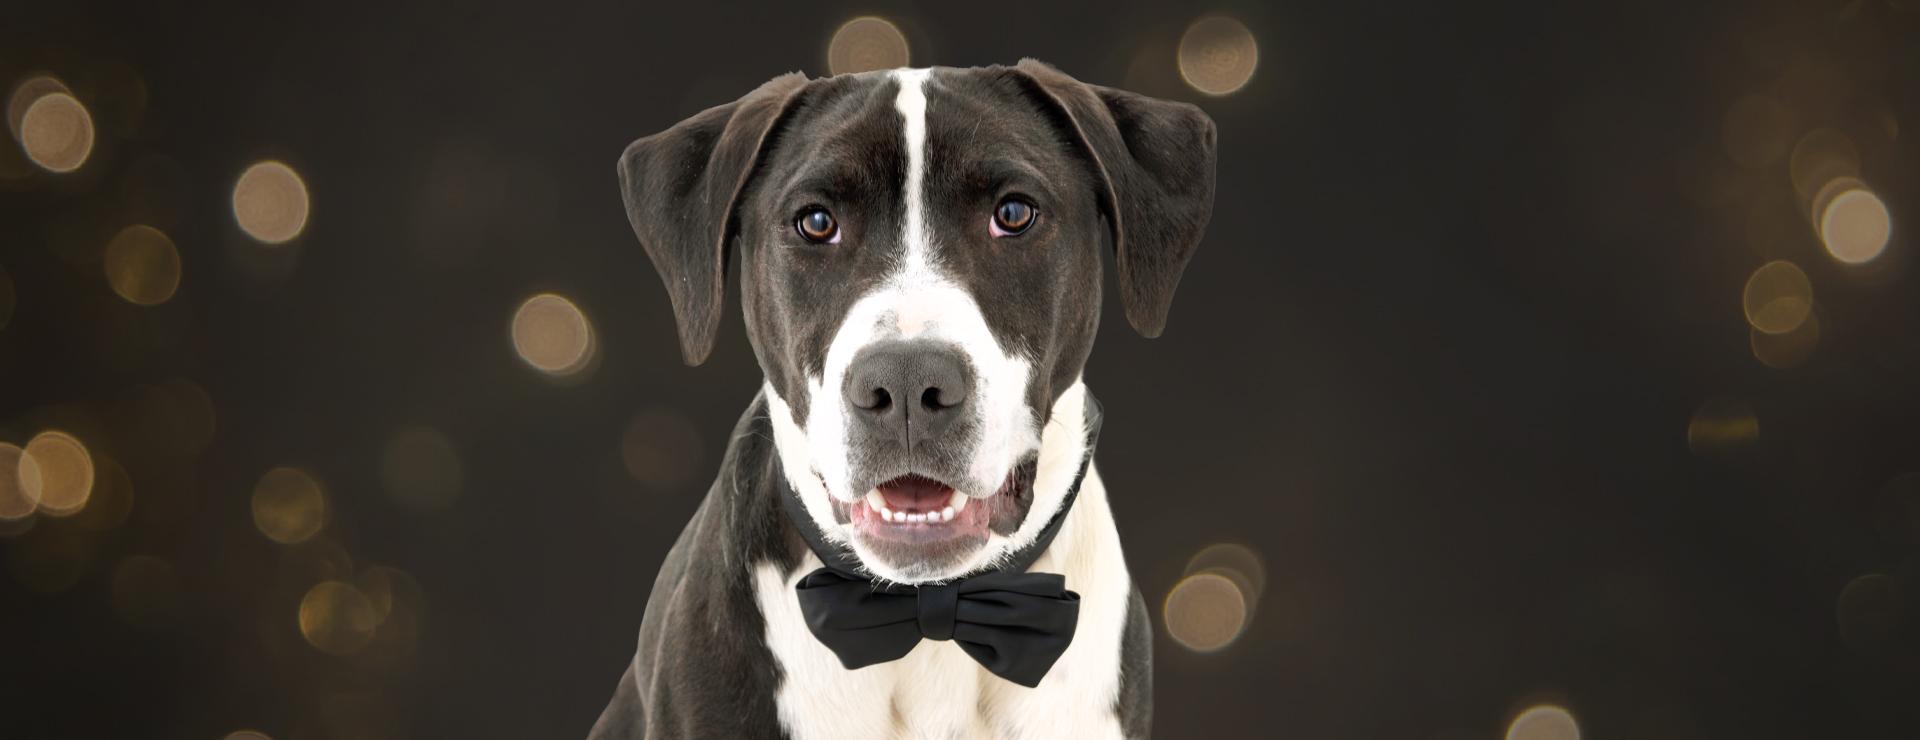 Dog wearing bowtie in front of a sparkly background